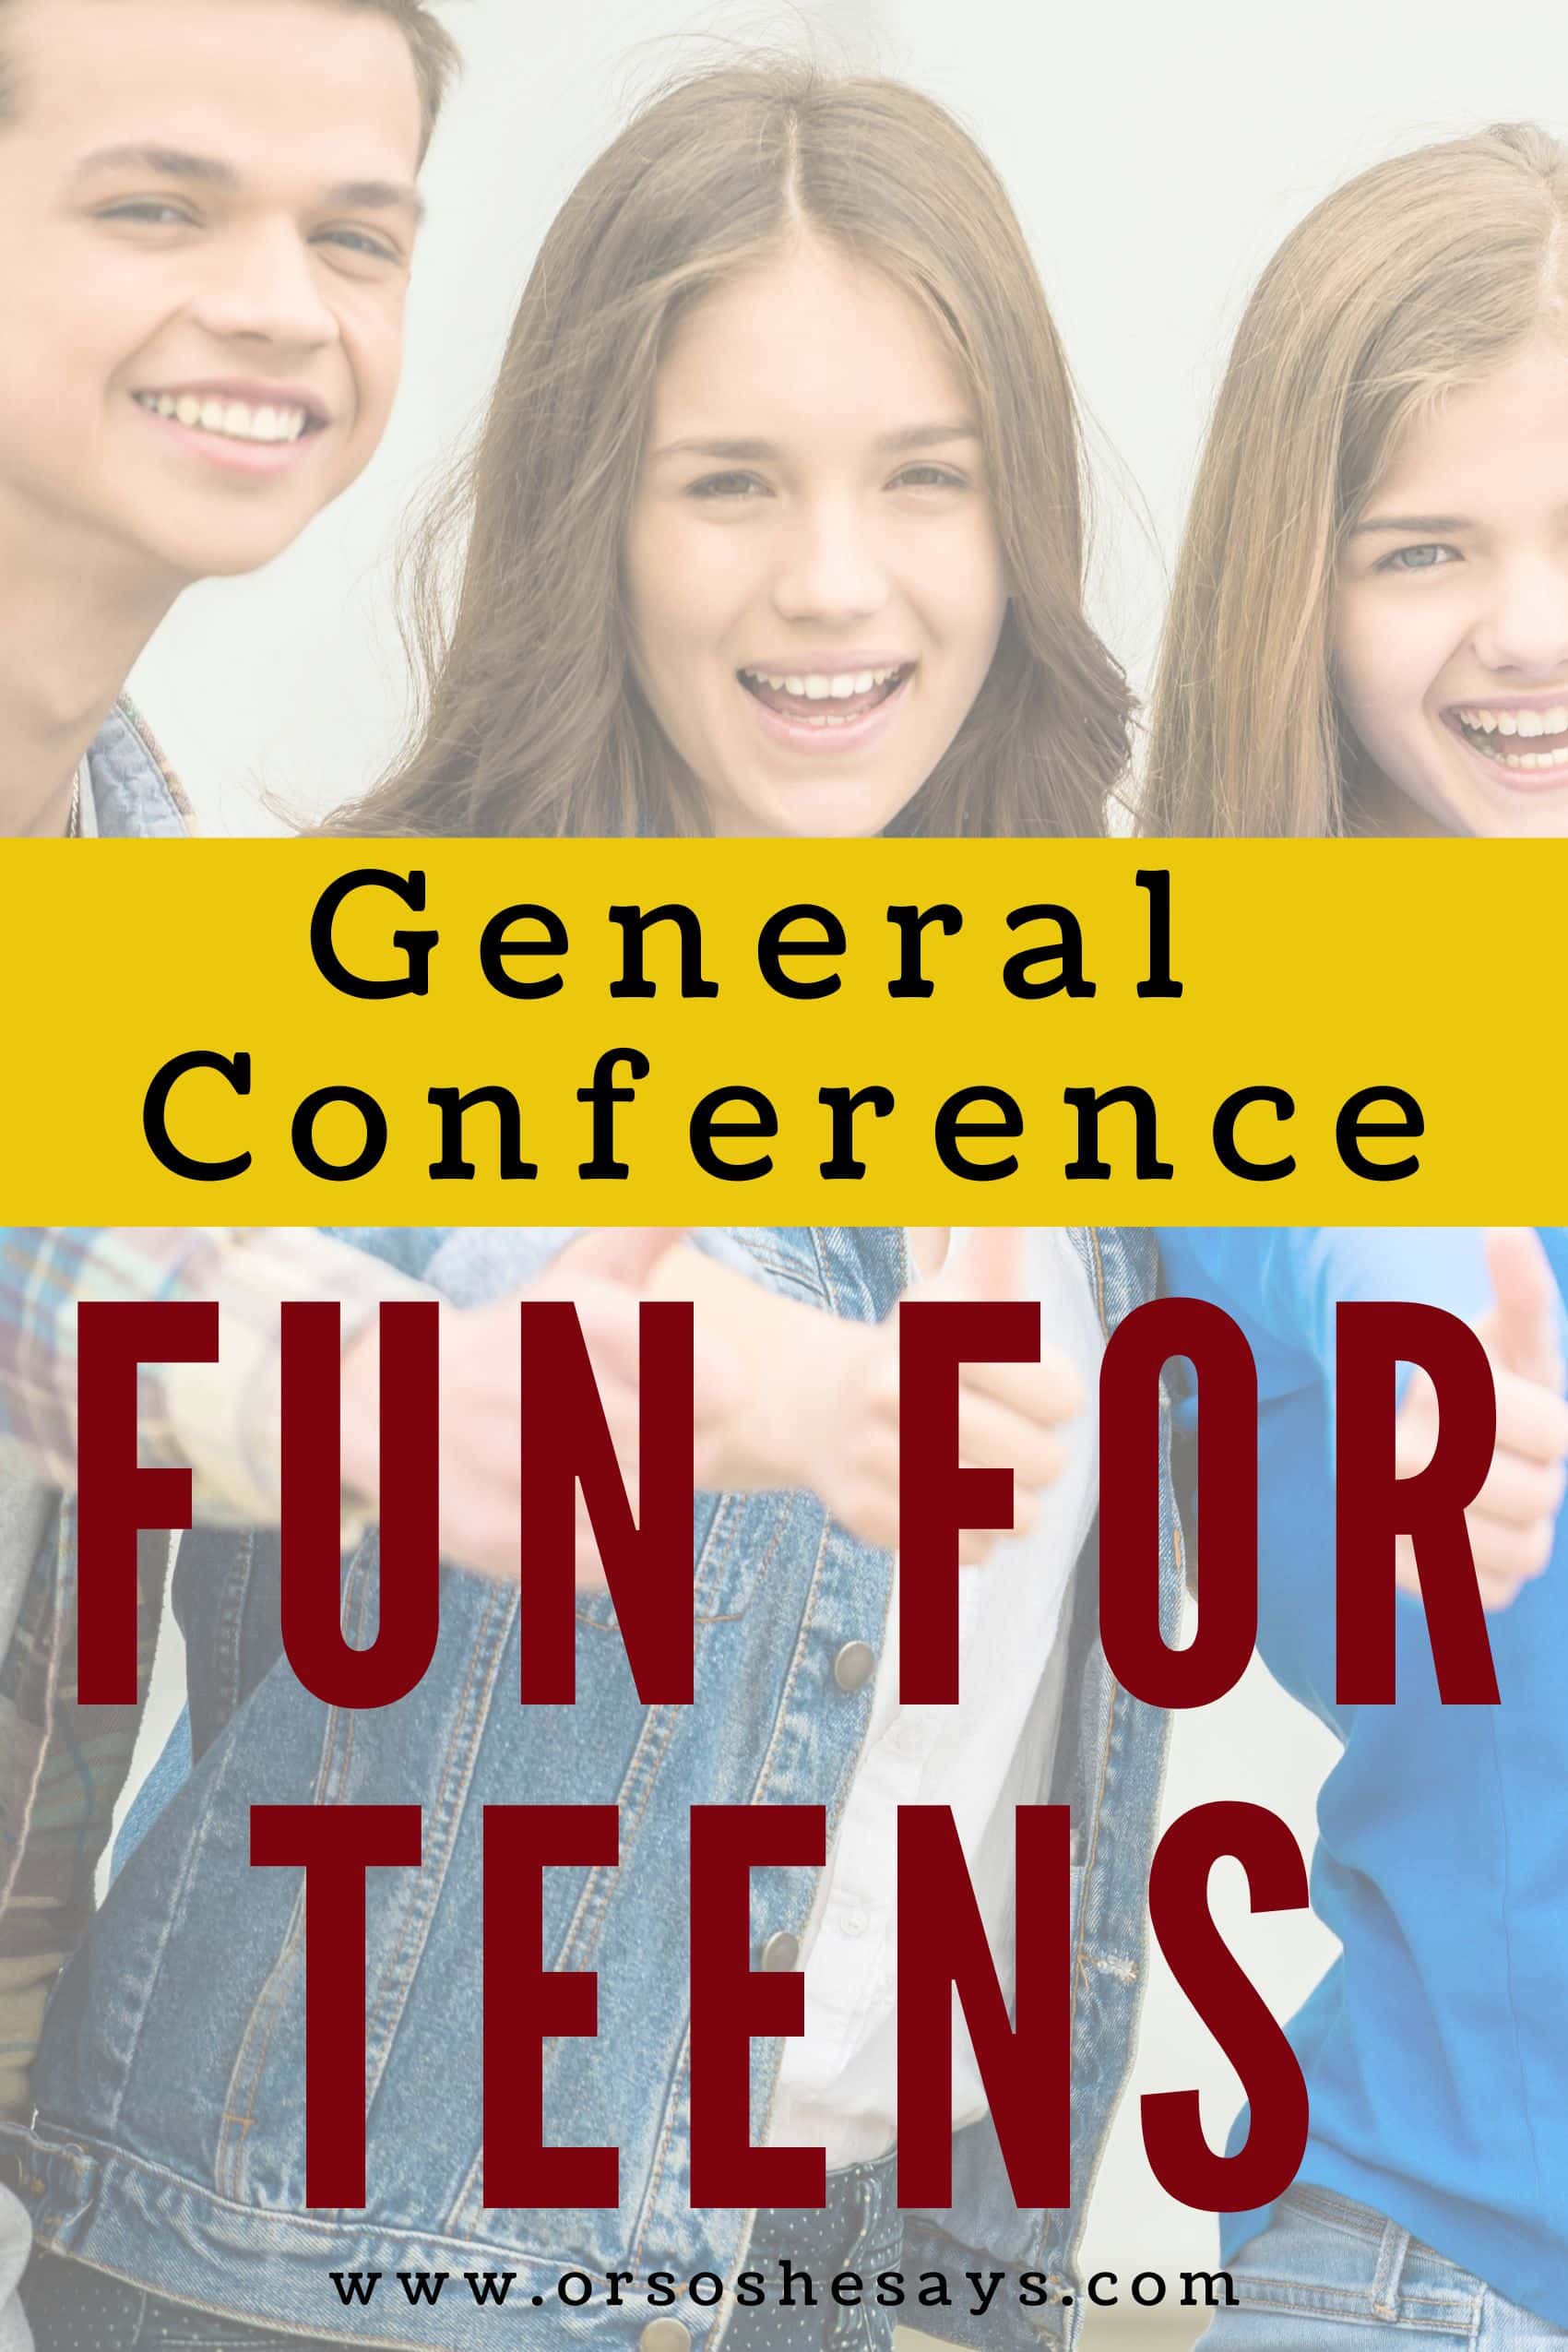 general conference teenagers